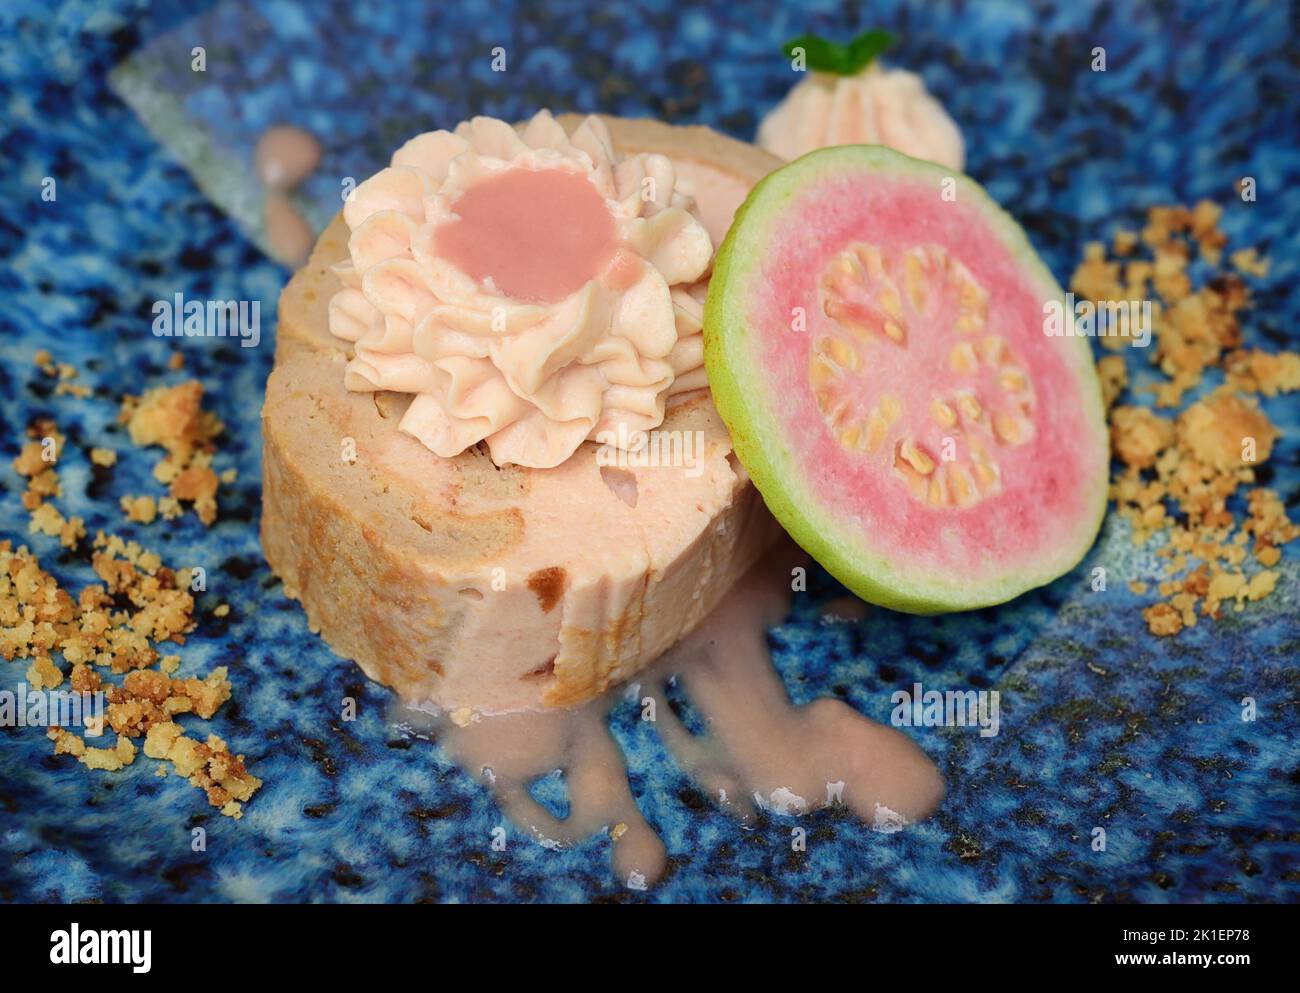 Guava Roll Cake on blue plate on light background with ripe guava fruit Stock Photo